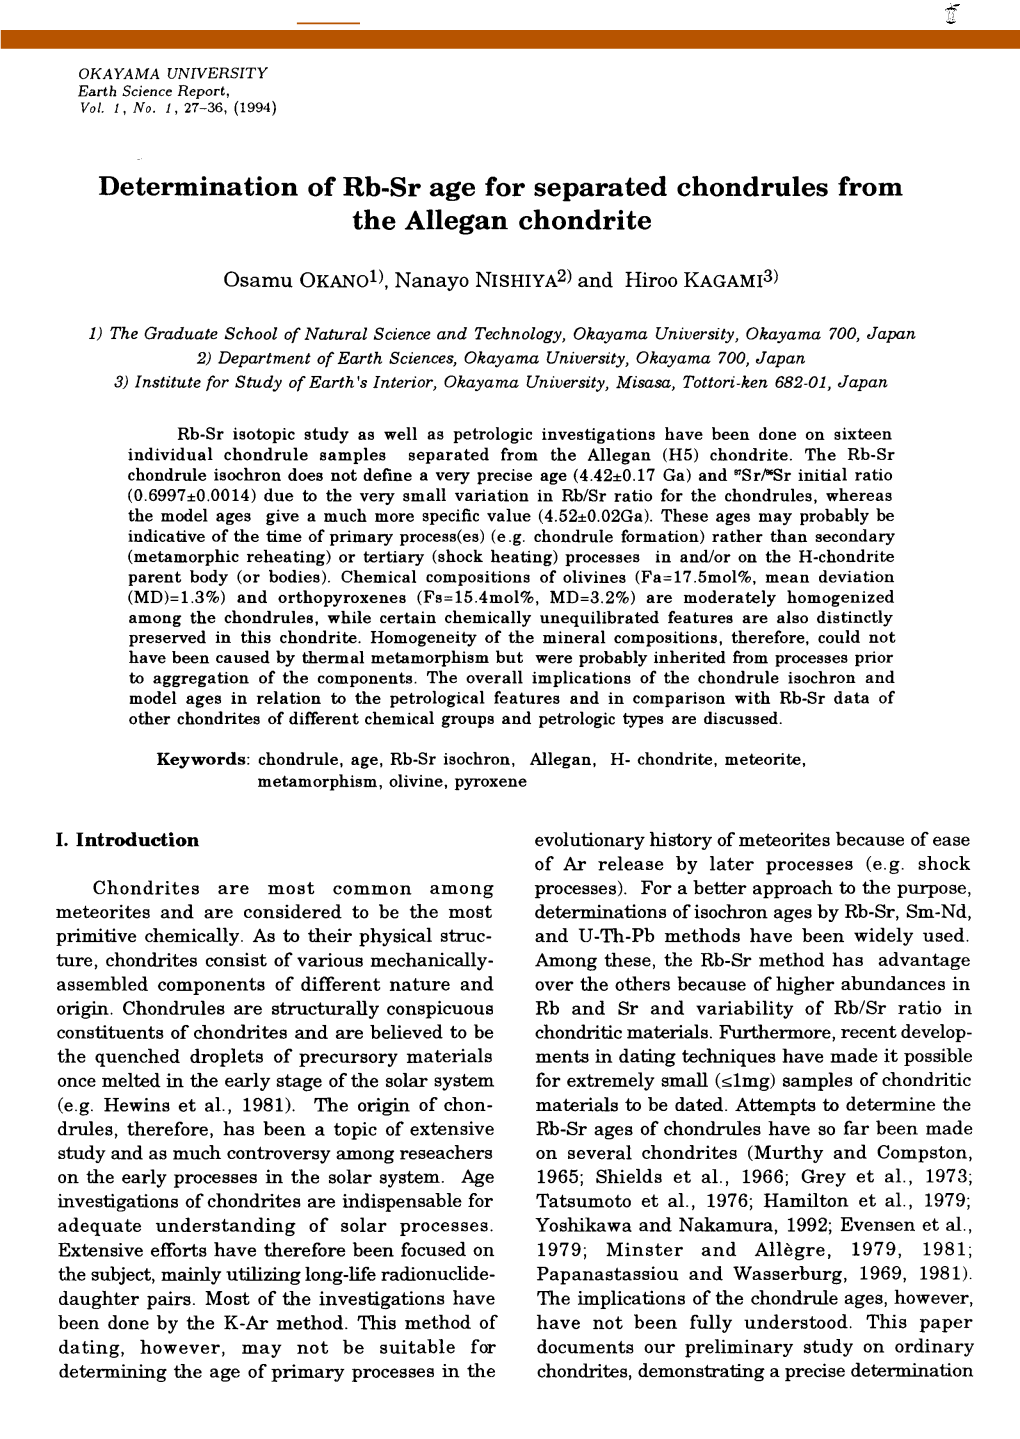 Determination of Rb-Sr Age for Separated Chondrules from the Allegan Chondrite